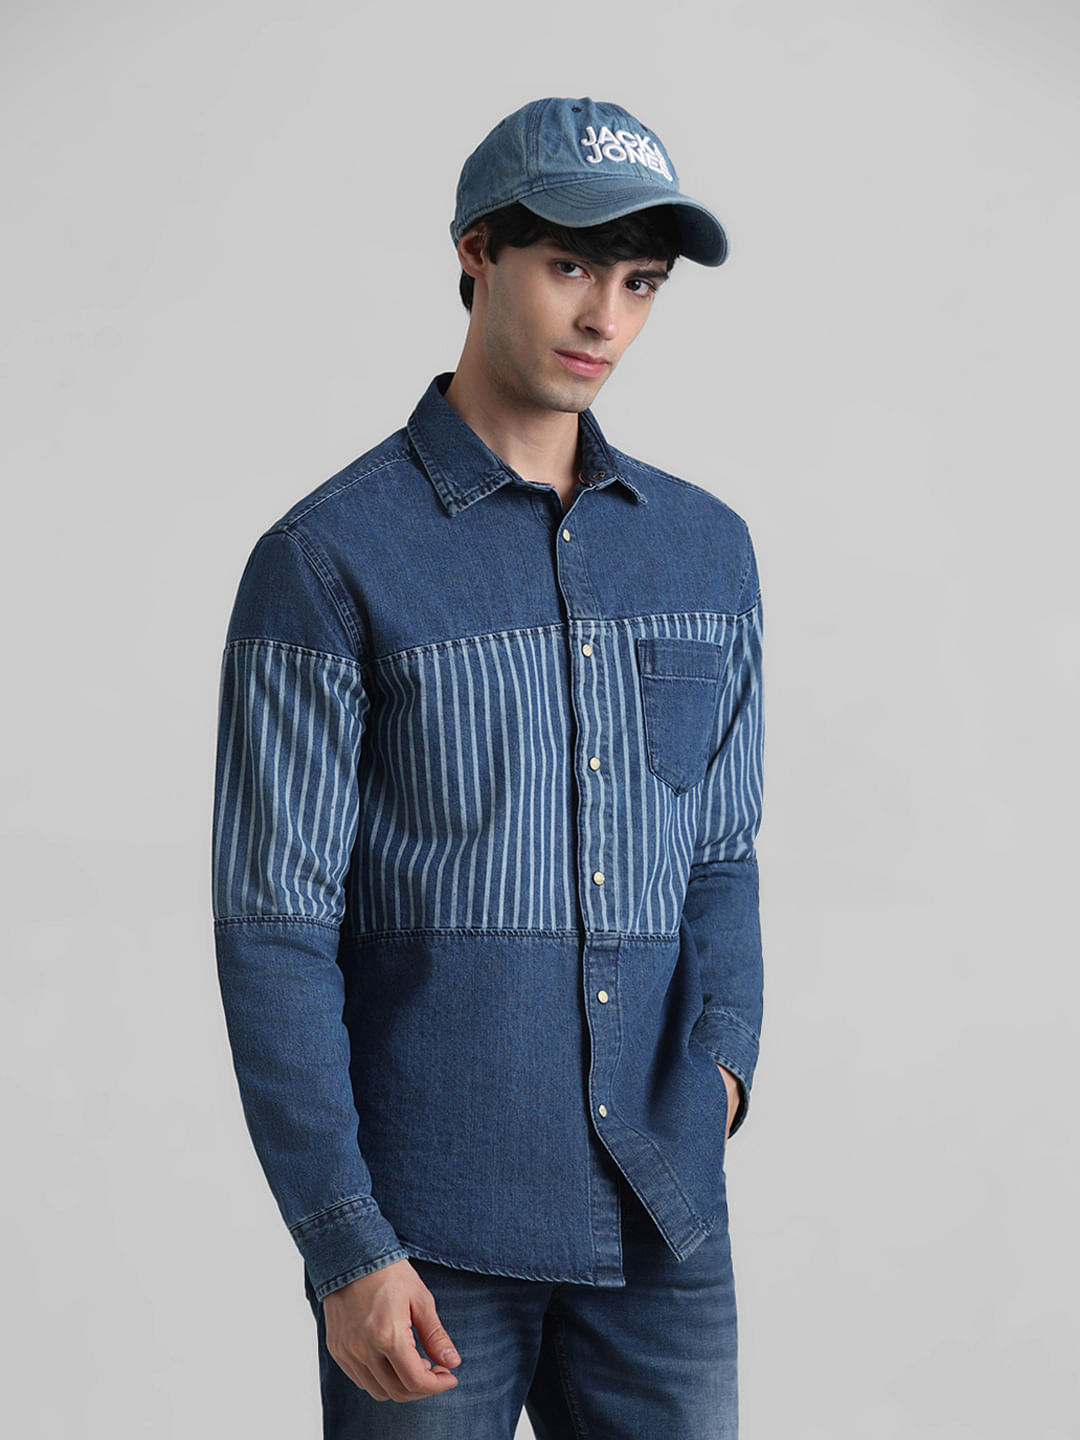 Buy Cantabil Denim Shirts Online At Best Price Offers In India